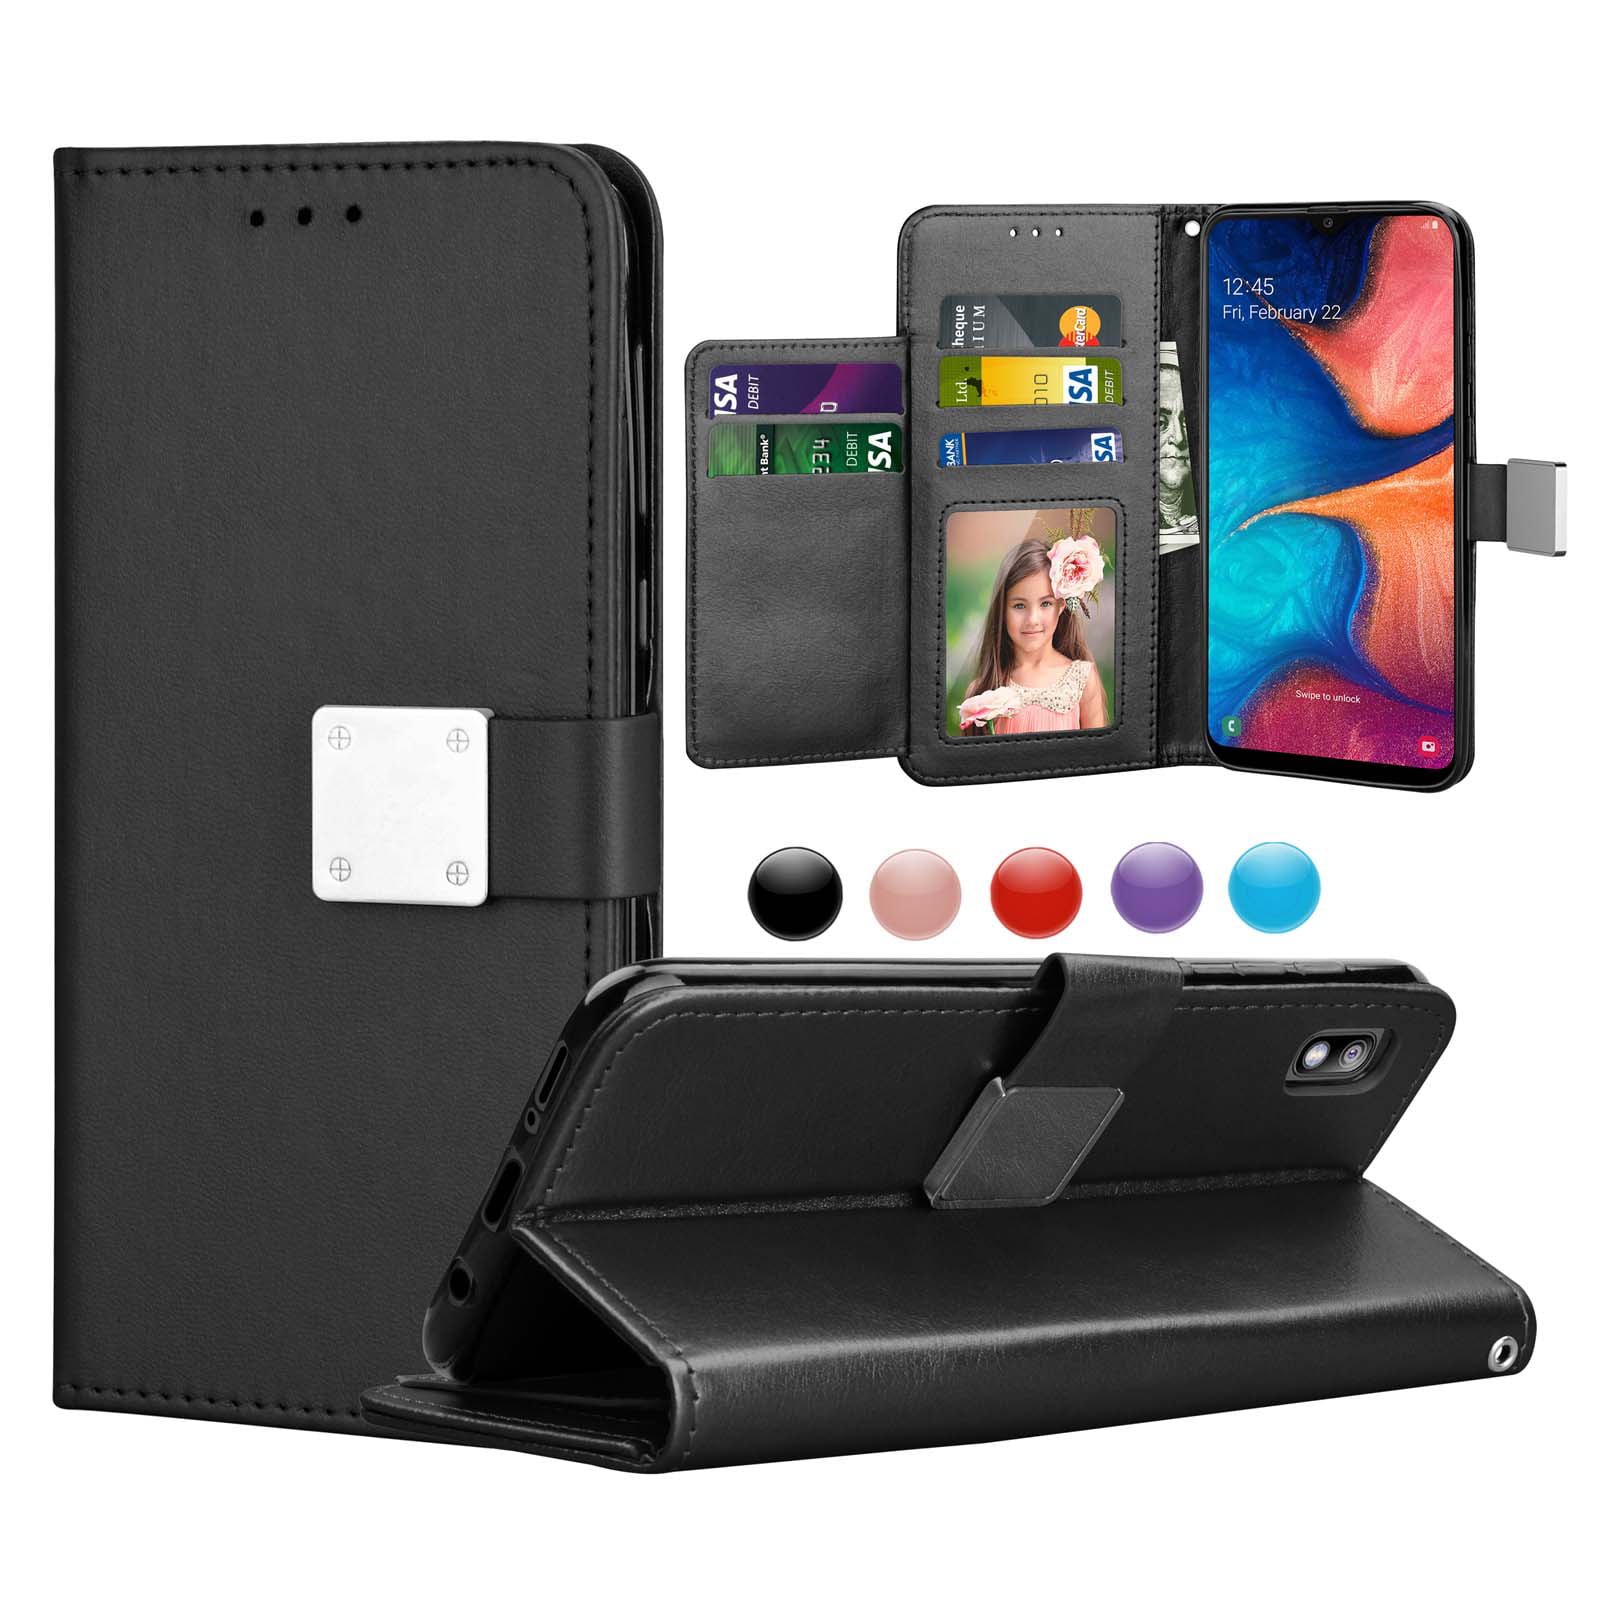 Hnzxy Compatible with Galaxy A10E Case Samsung Galaxy A10E Cover,Elegant Lite Tree Painted Flip PU Leather Notebook Wallet Case Magnetic Stand Card Slot Folio Bumper Case for Galaxy A10E,Life Free 